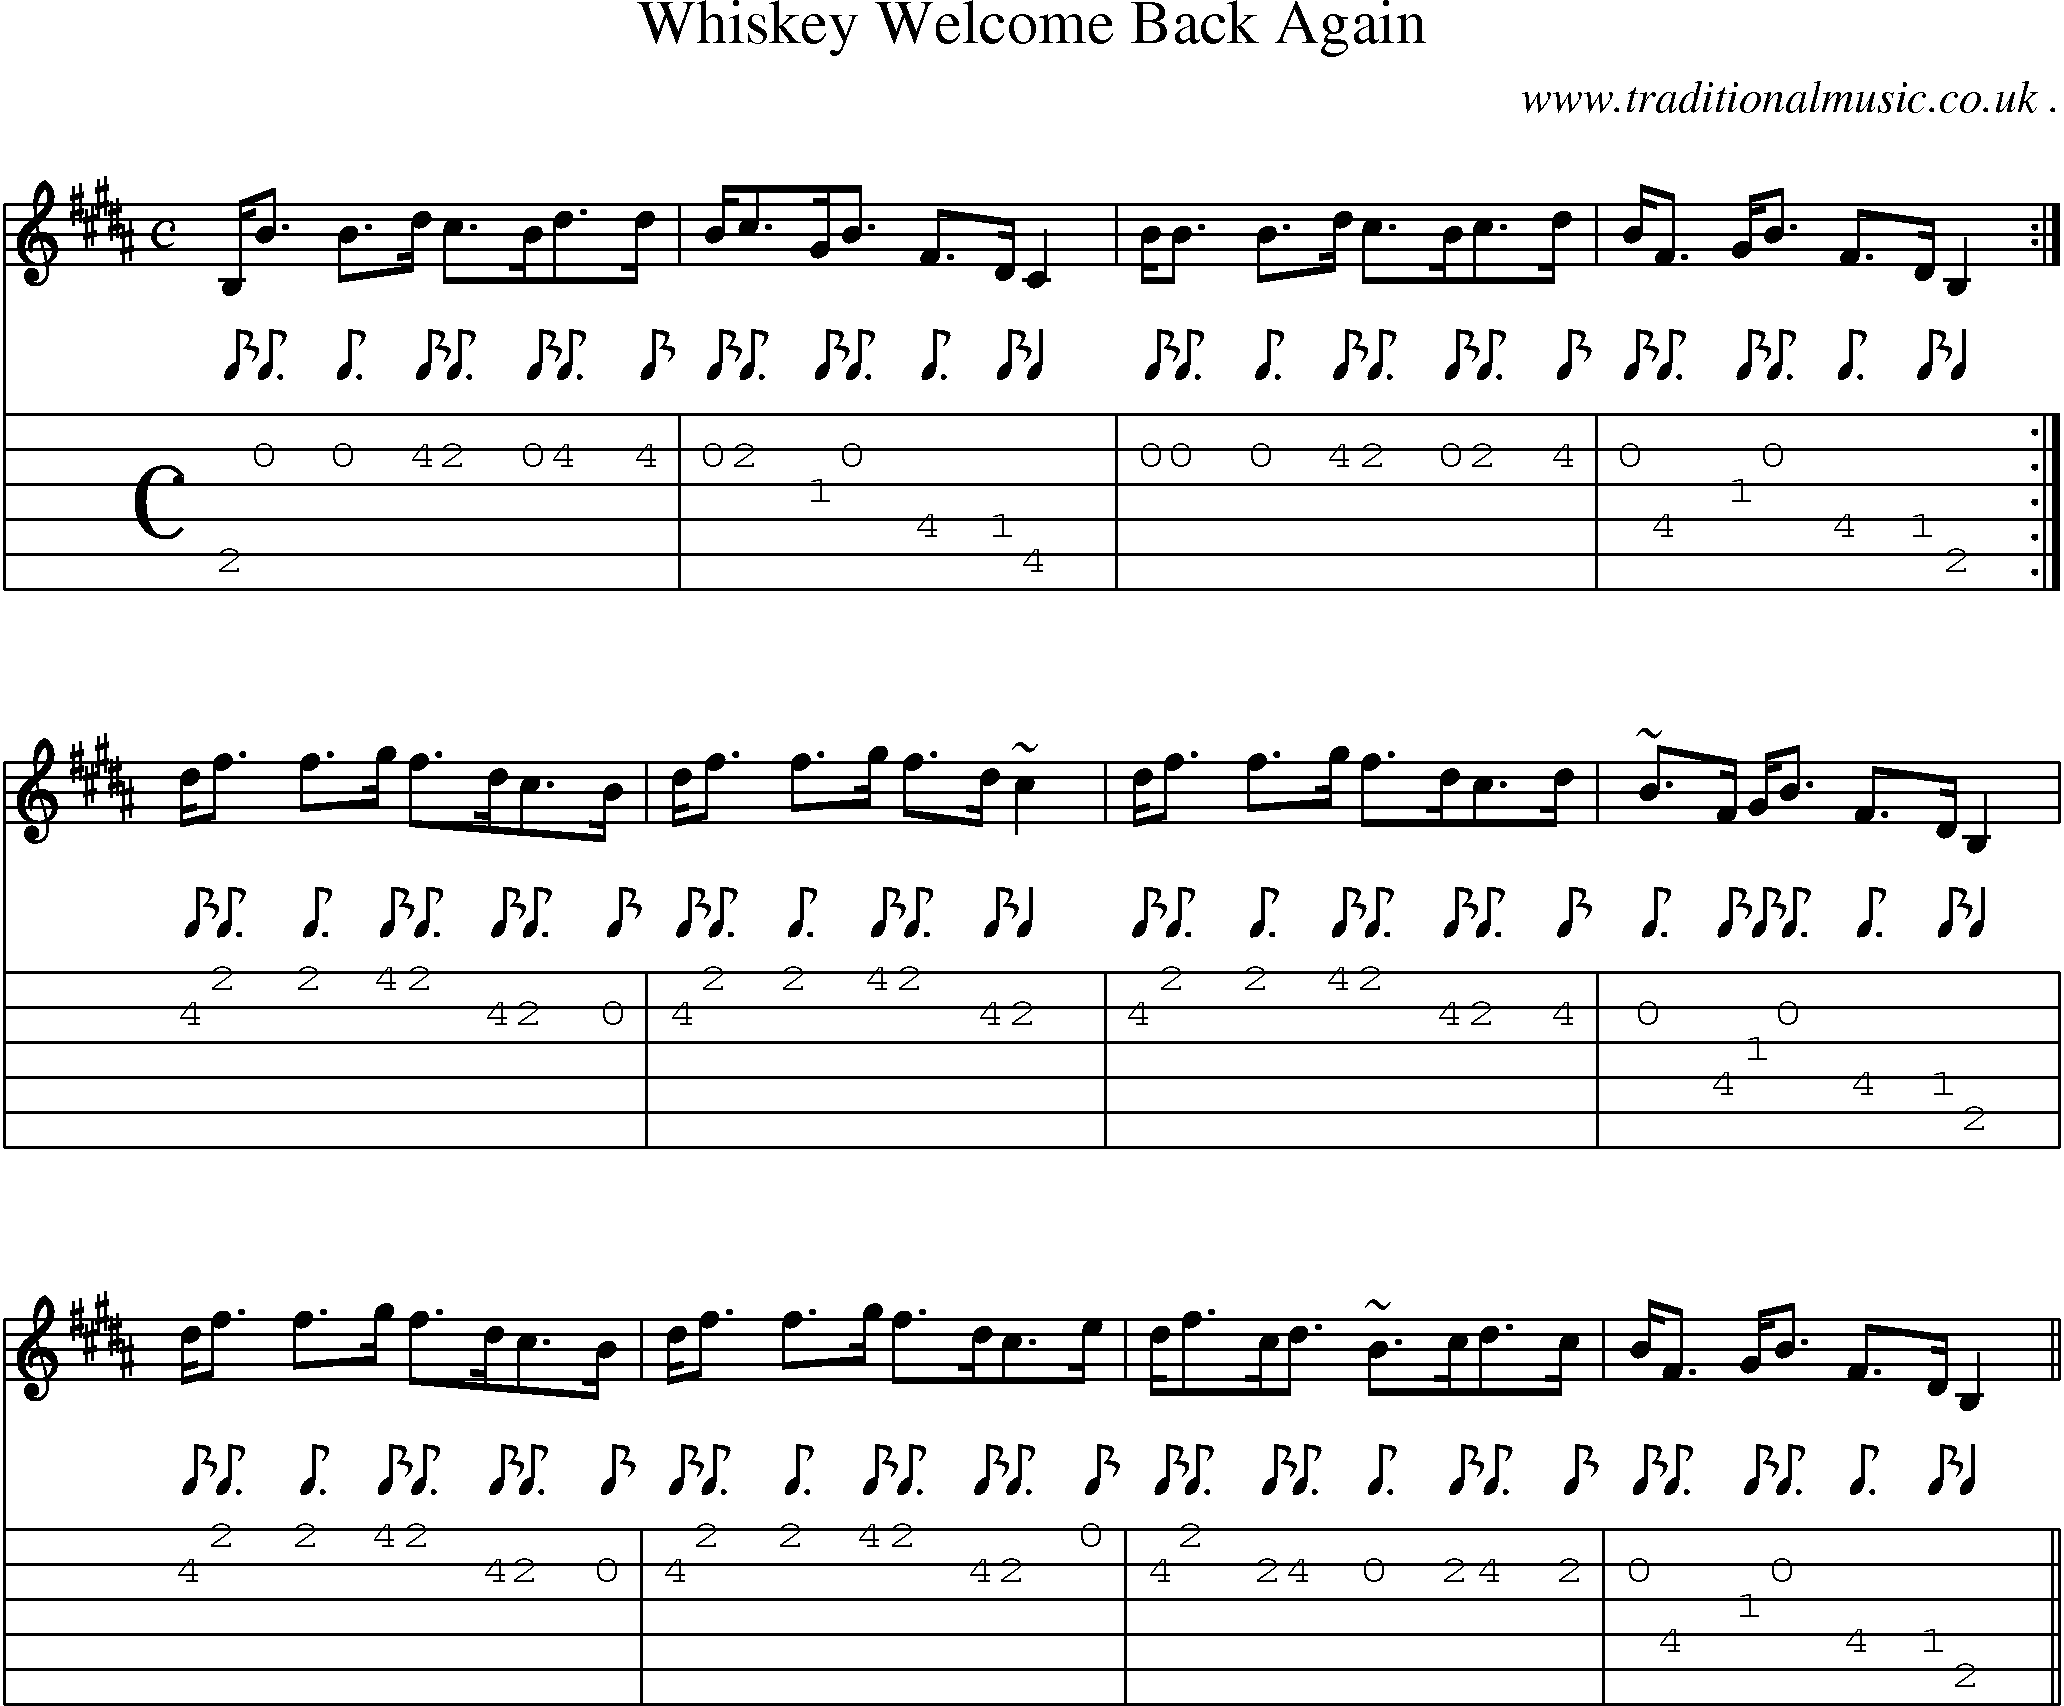 Sheet-music  score, Chords and Guitar Tabs for Whiskey Welcome Back Again